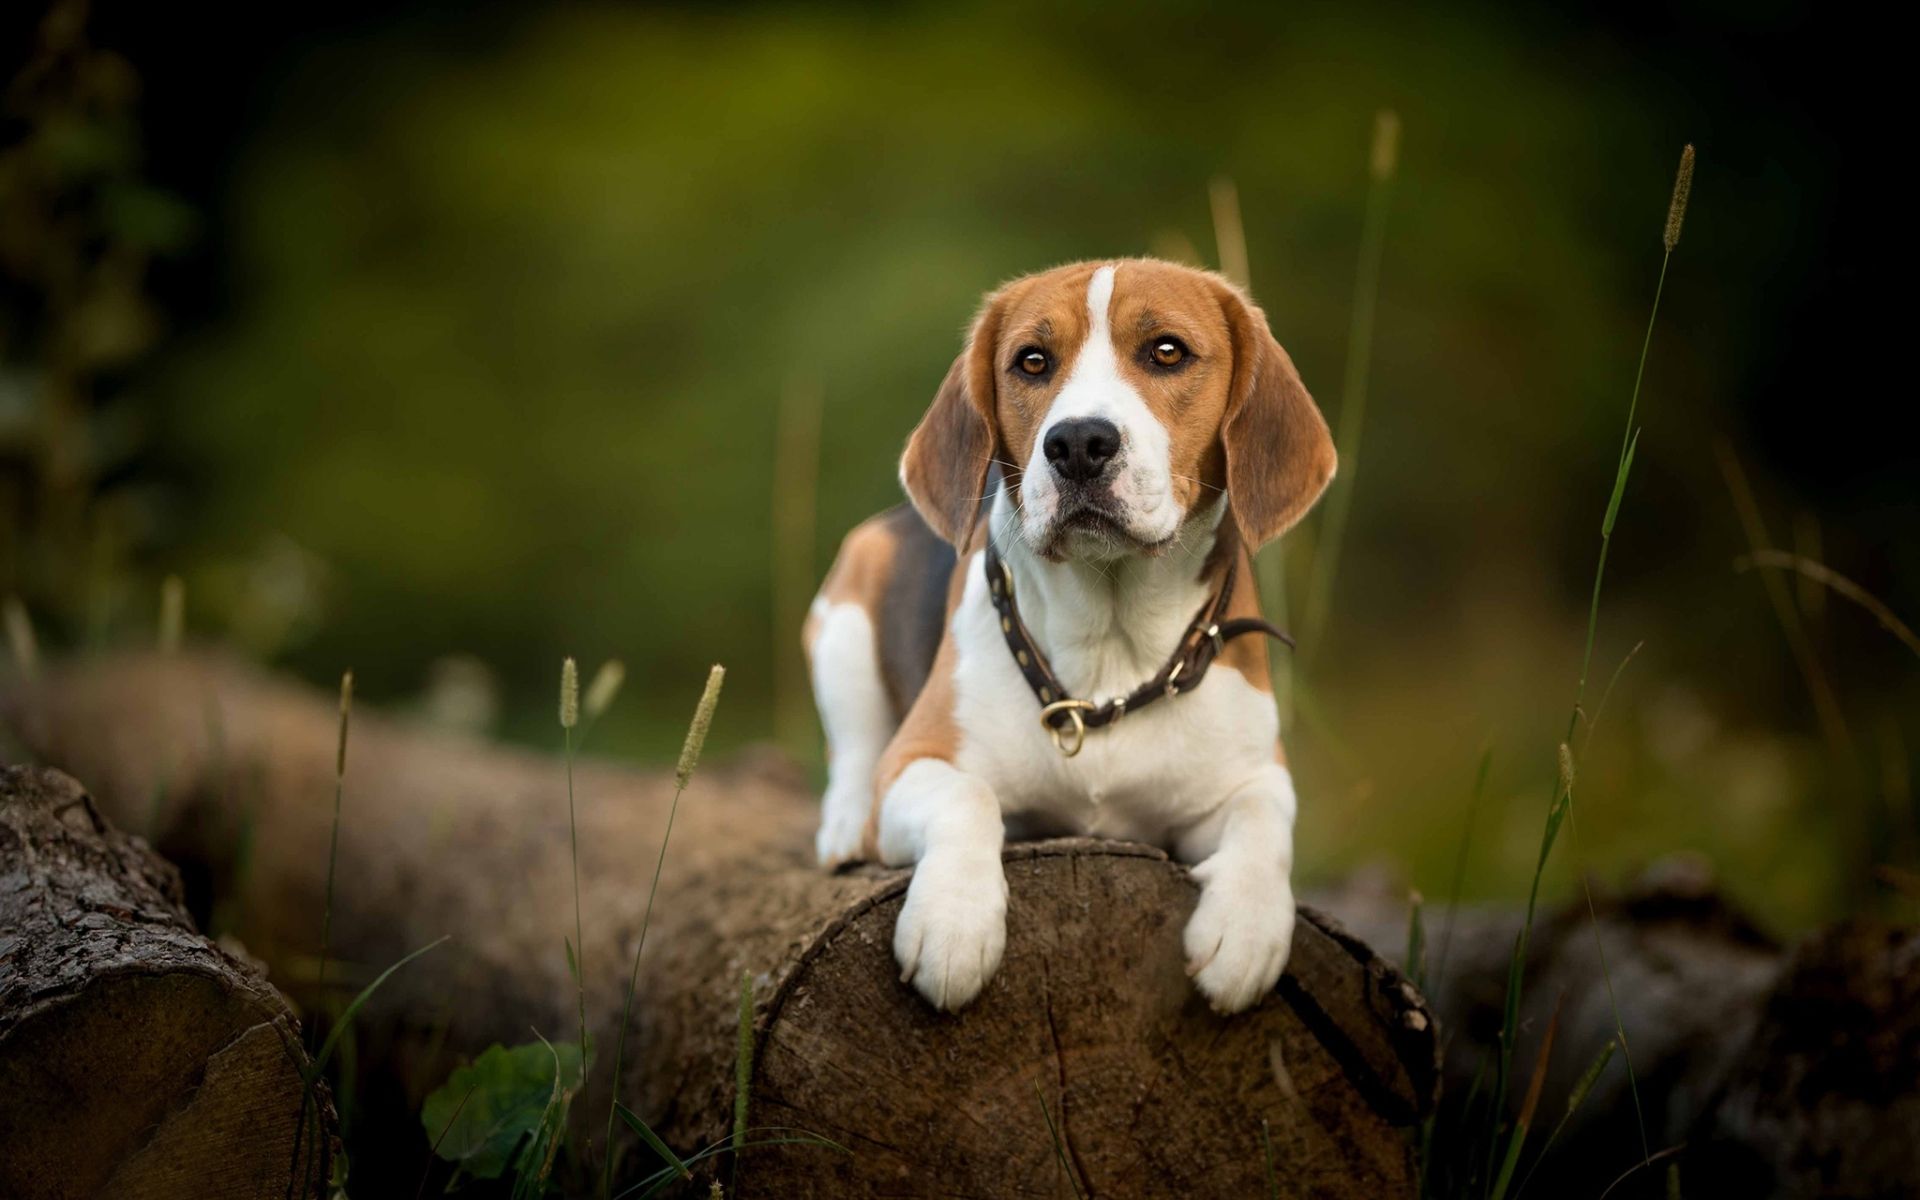 Download wallpaper Beagle, beam, cute dog, pets, dogs, forest